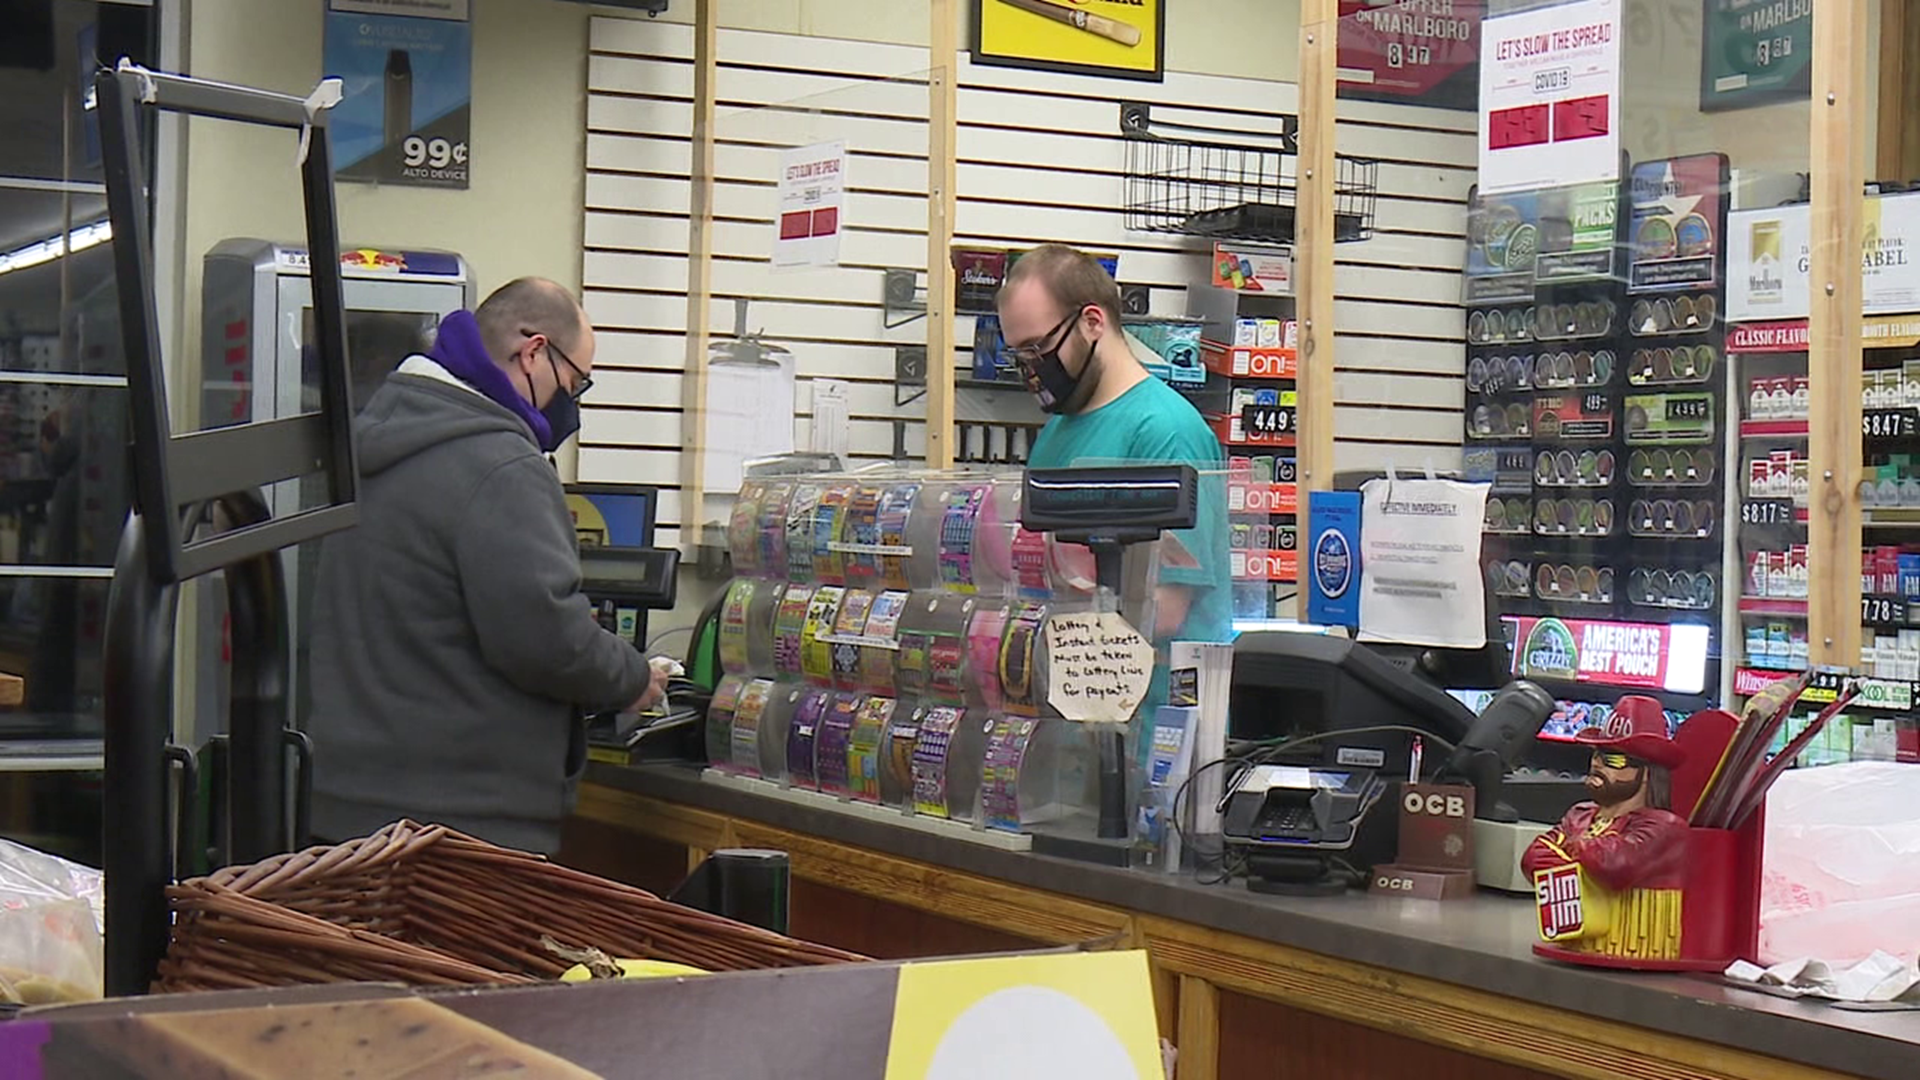 According to statistics from the Pennsylvania Lottery, residents in Carbon County have won more than $24 million.